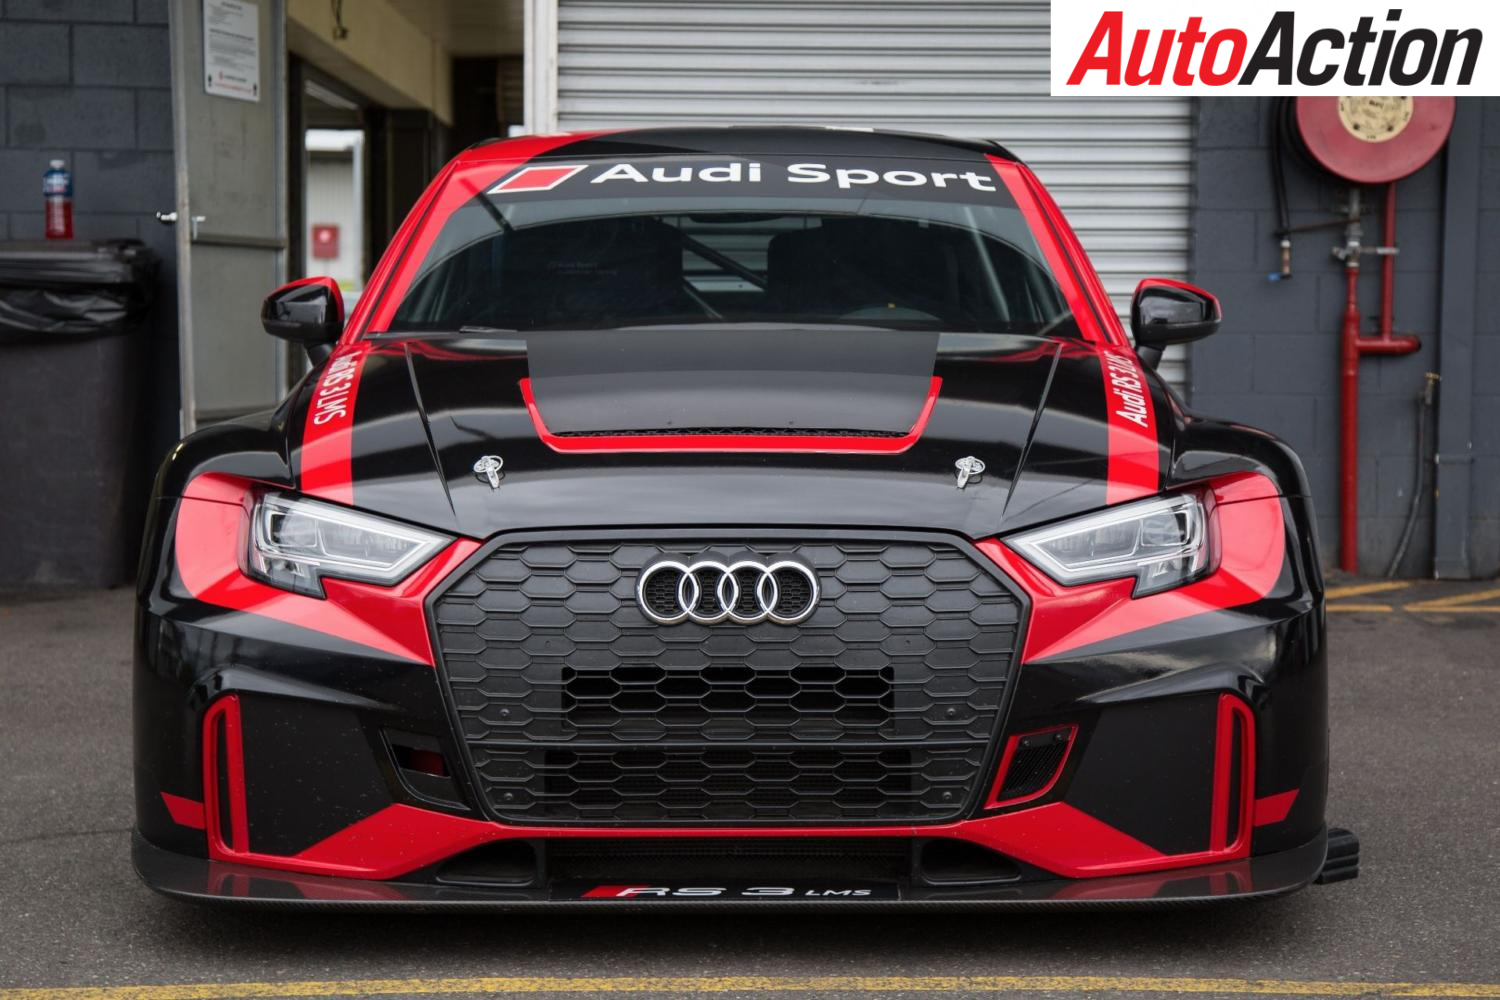 Audi RS3 LMS TCR Car on display at Phillip Island - Photo: Rhys Vandersyde